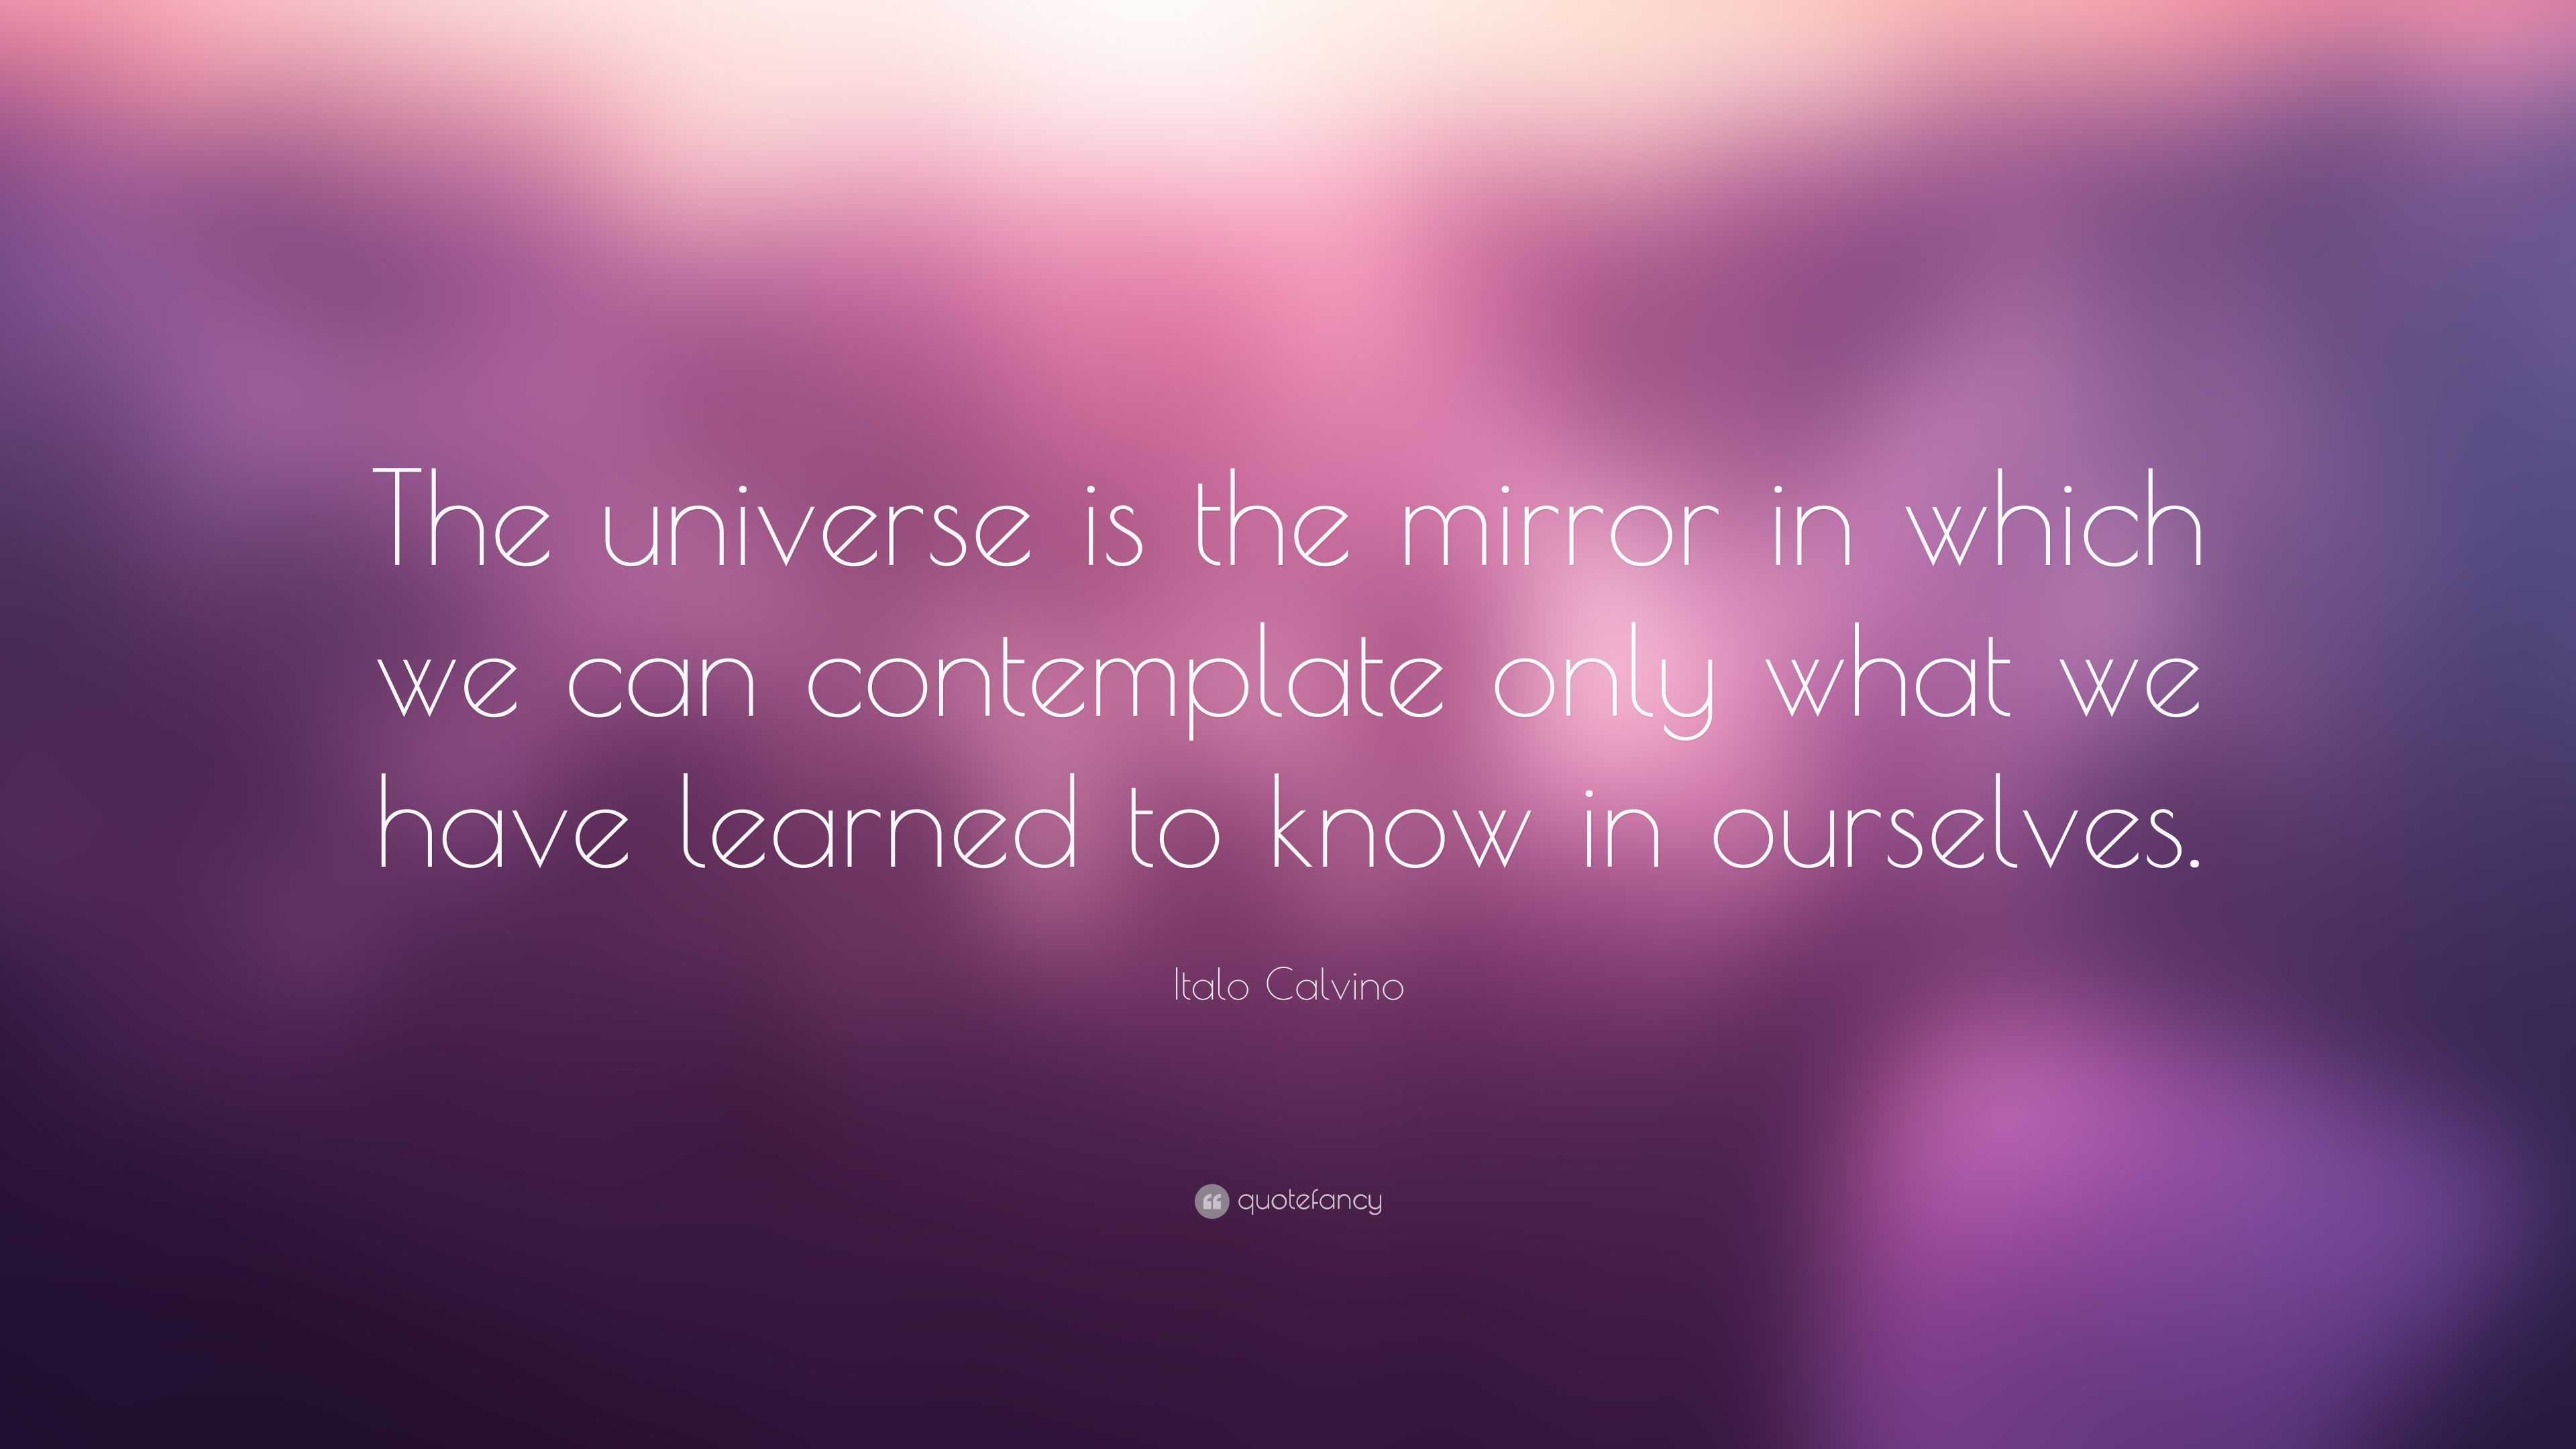 Italo Calvino Quote: “The universe is the mirror in which we can ...